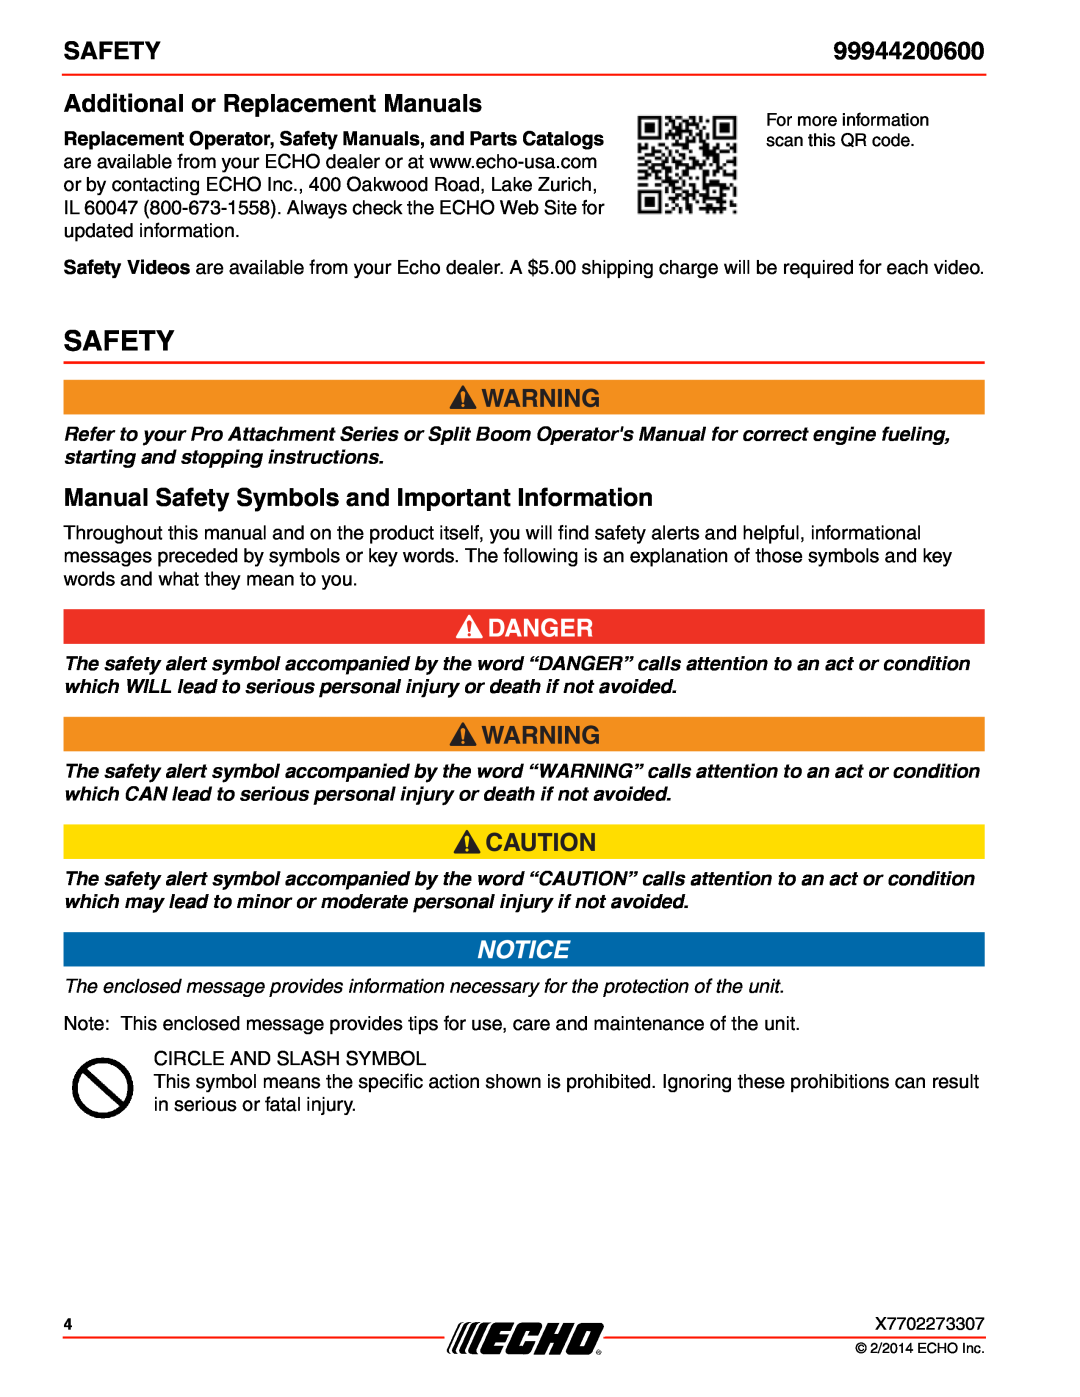 Echo 2400, 260, 261, 231 99944200600, Additional or Replacement Manuals, Manual Safety Symbols and Important Information 